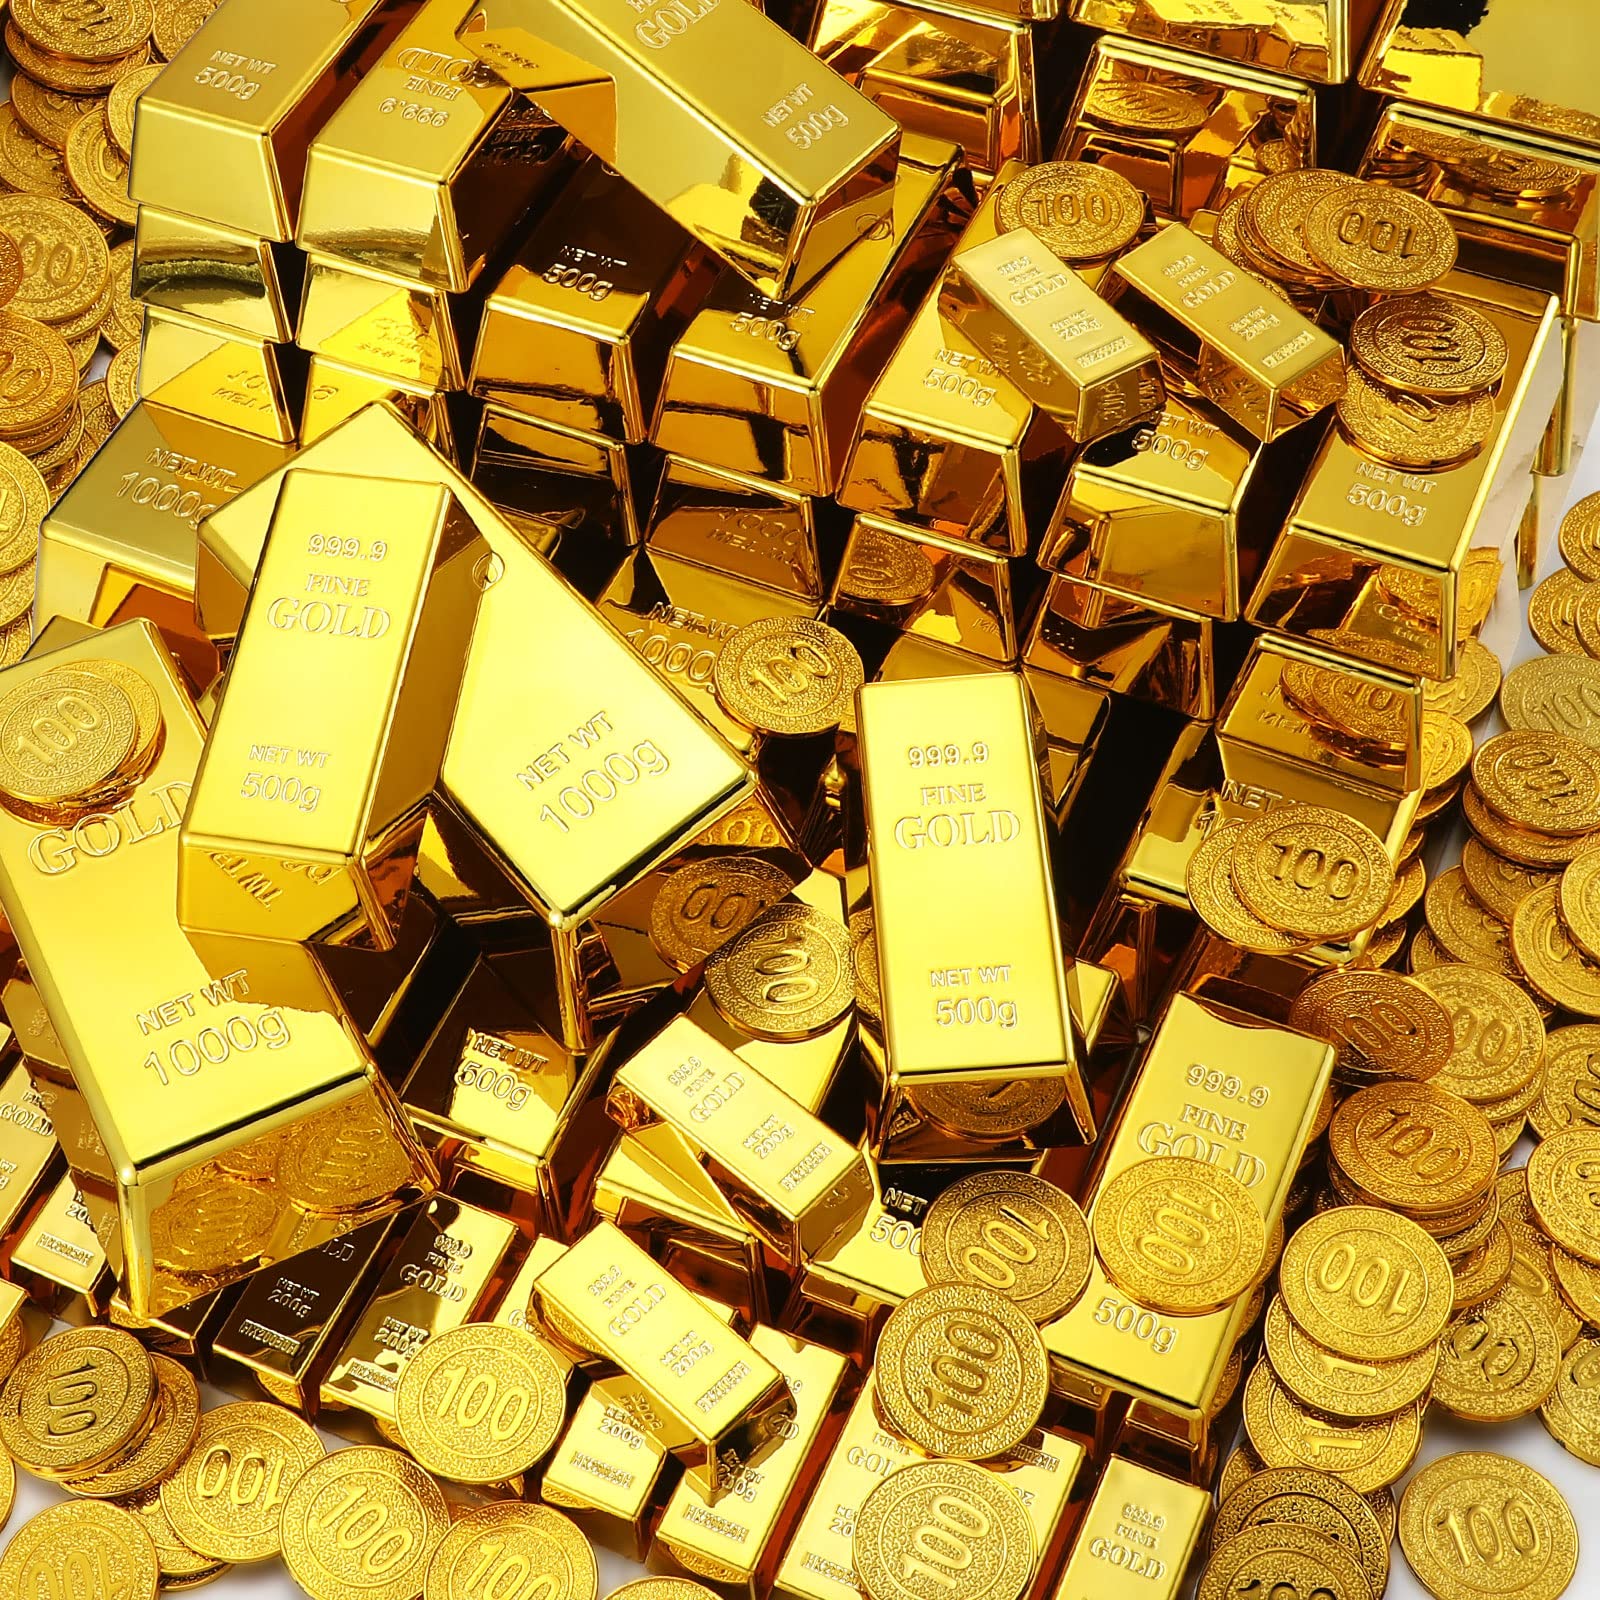 Gold coins or bars